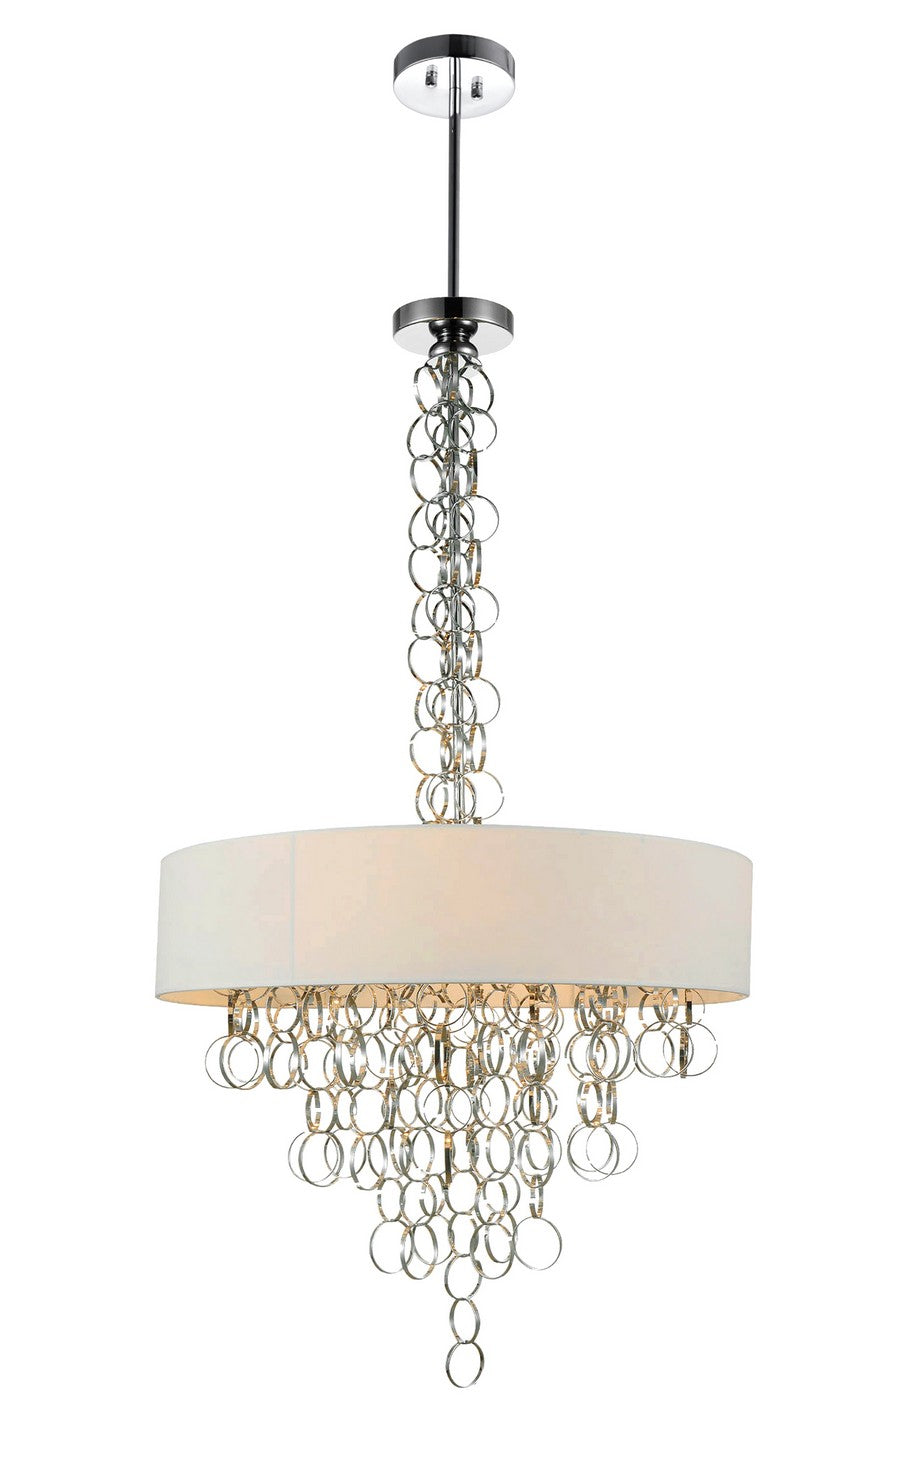 8 LIGHT DRUM SHADE CHANDELIER WITH CHROME FINISH - Dreamart Gallery